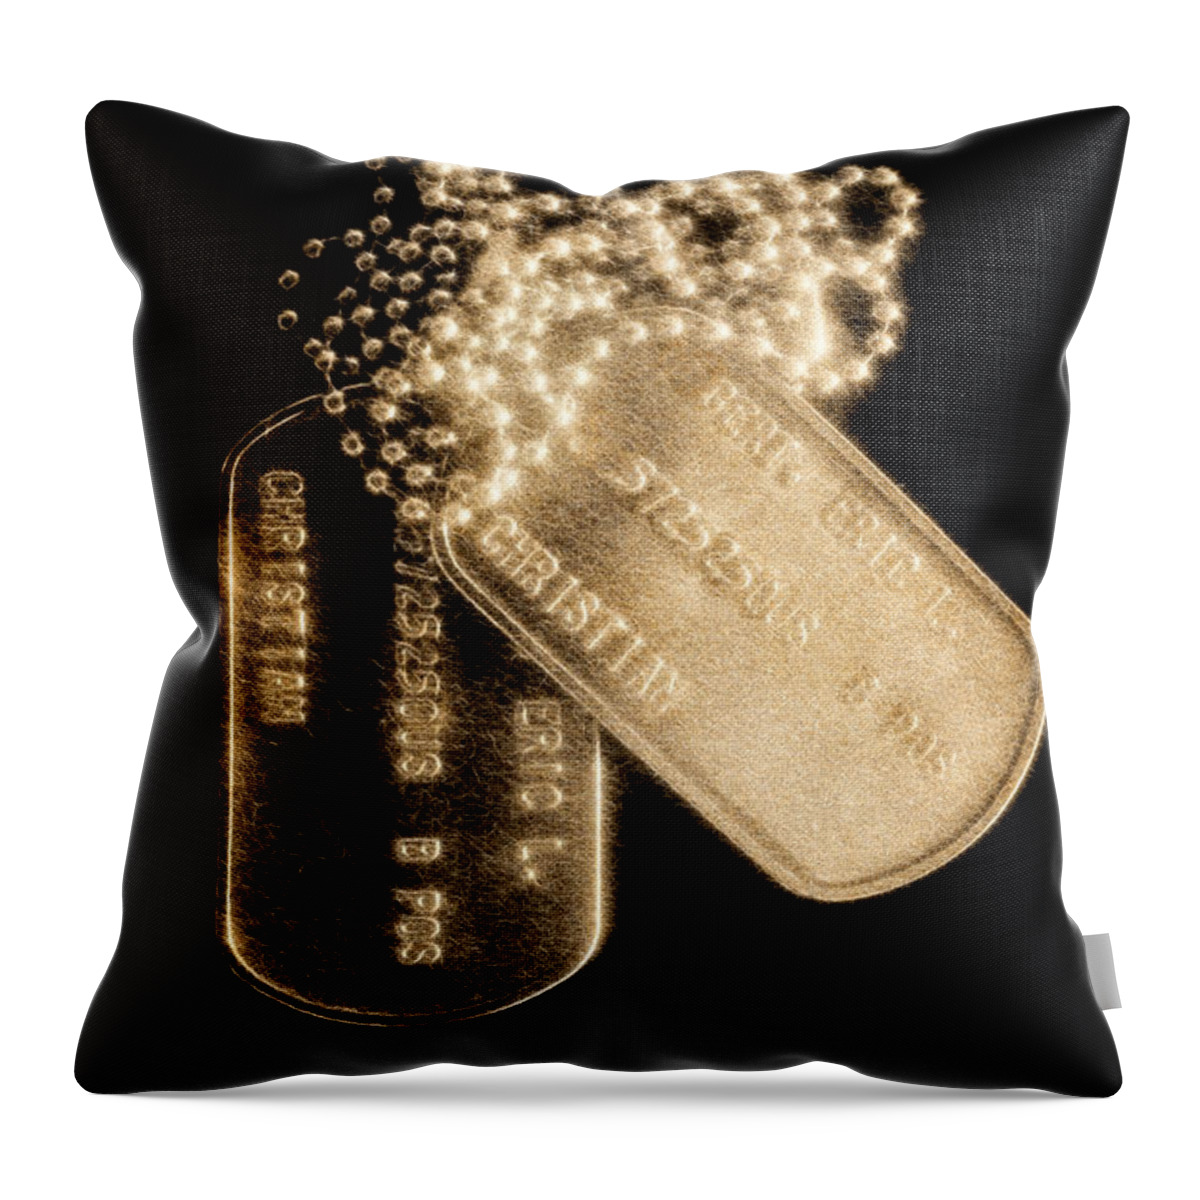 Stripes Of Commitment Throw Pillow featuring the photograph Stripes of commitment Fractal by Weston Westmoreland